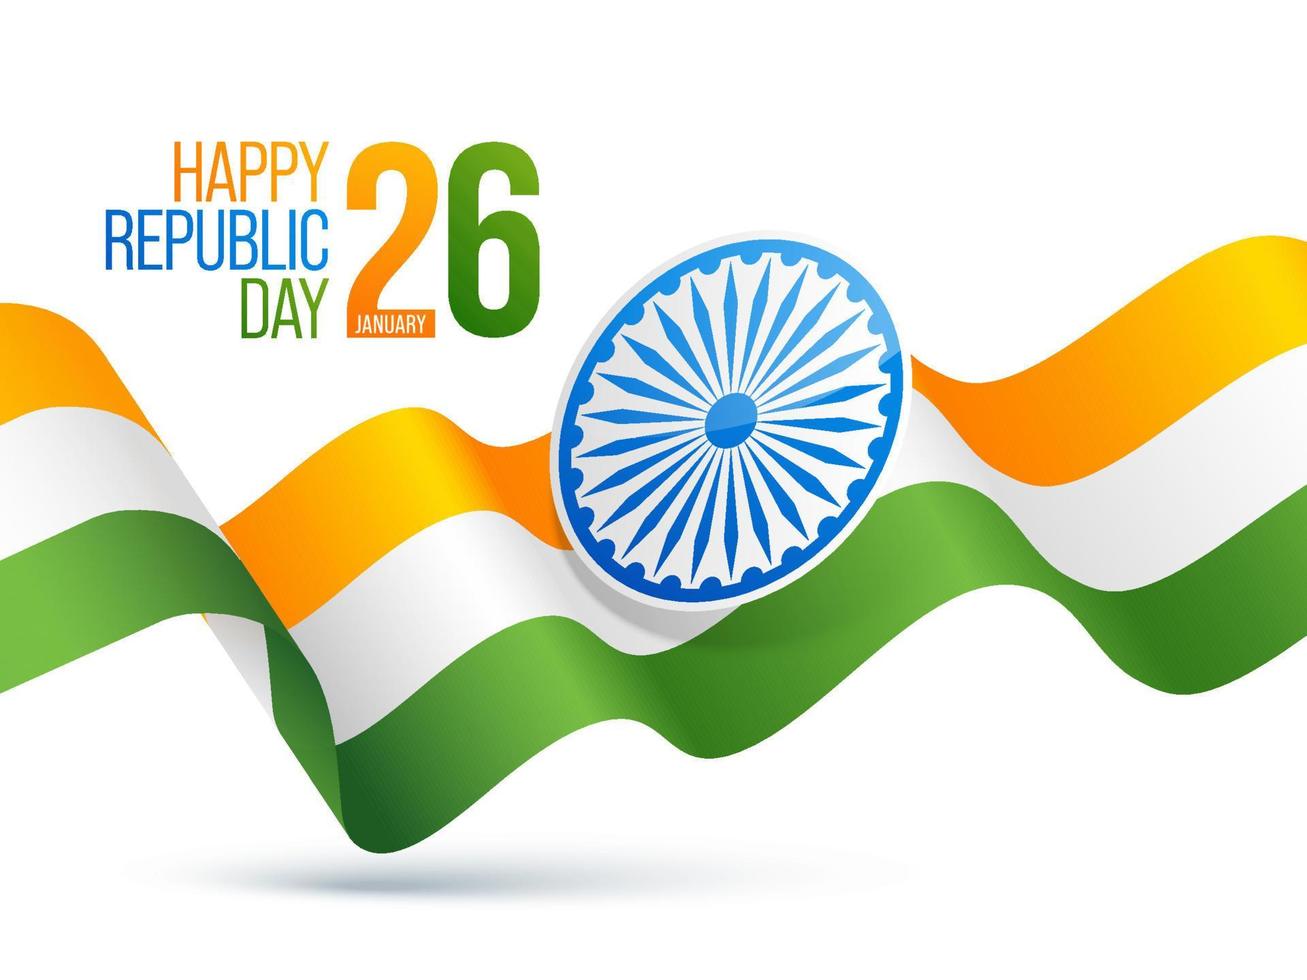 26th January Happy Republic Day Text With Wavy Indian Tricolor Ribbon And Ashoka Wheel On White Background. vector